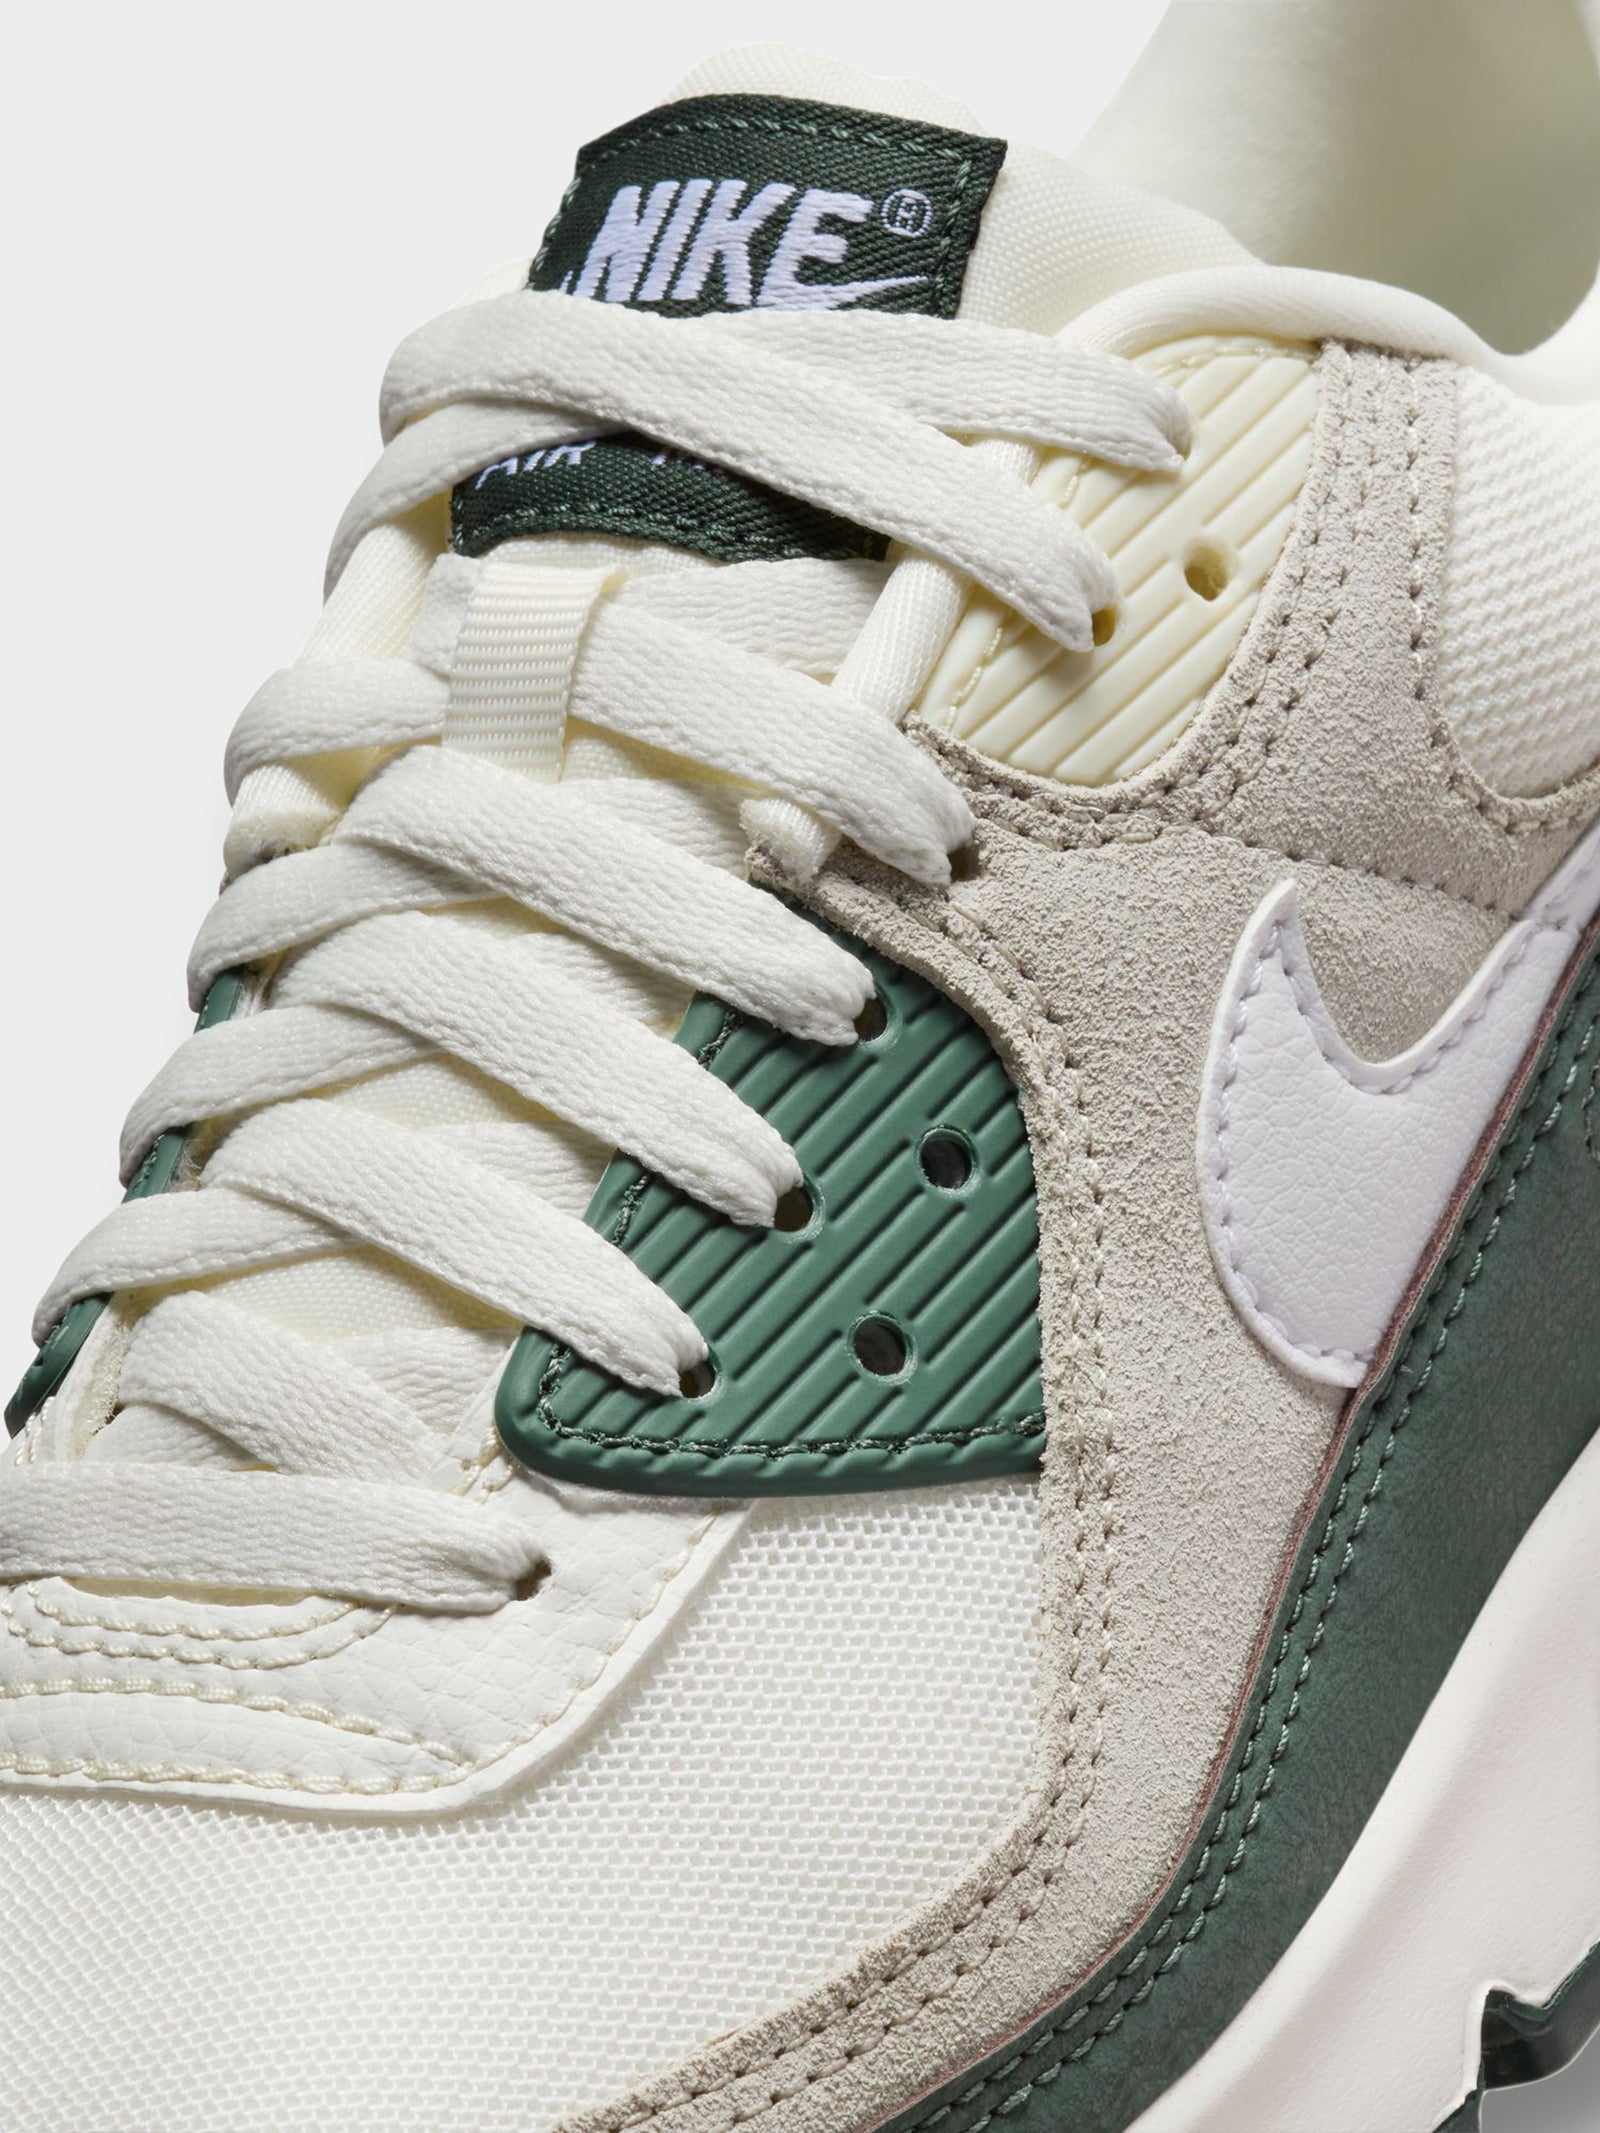 Womens Air Max 90 Sneakers in Sail, White, Green & Coconut Milk